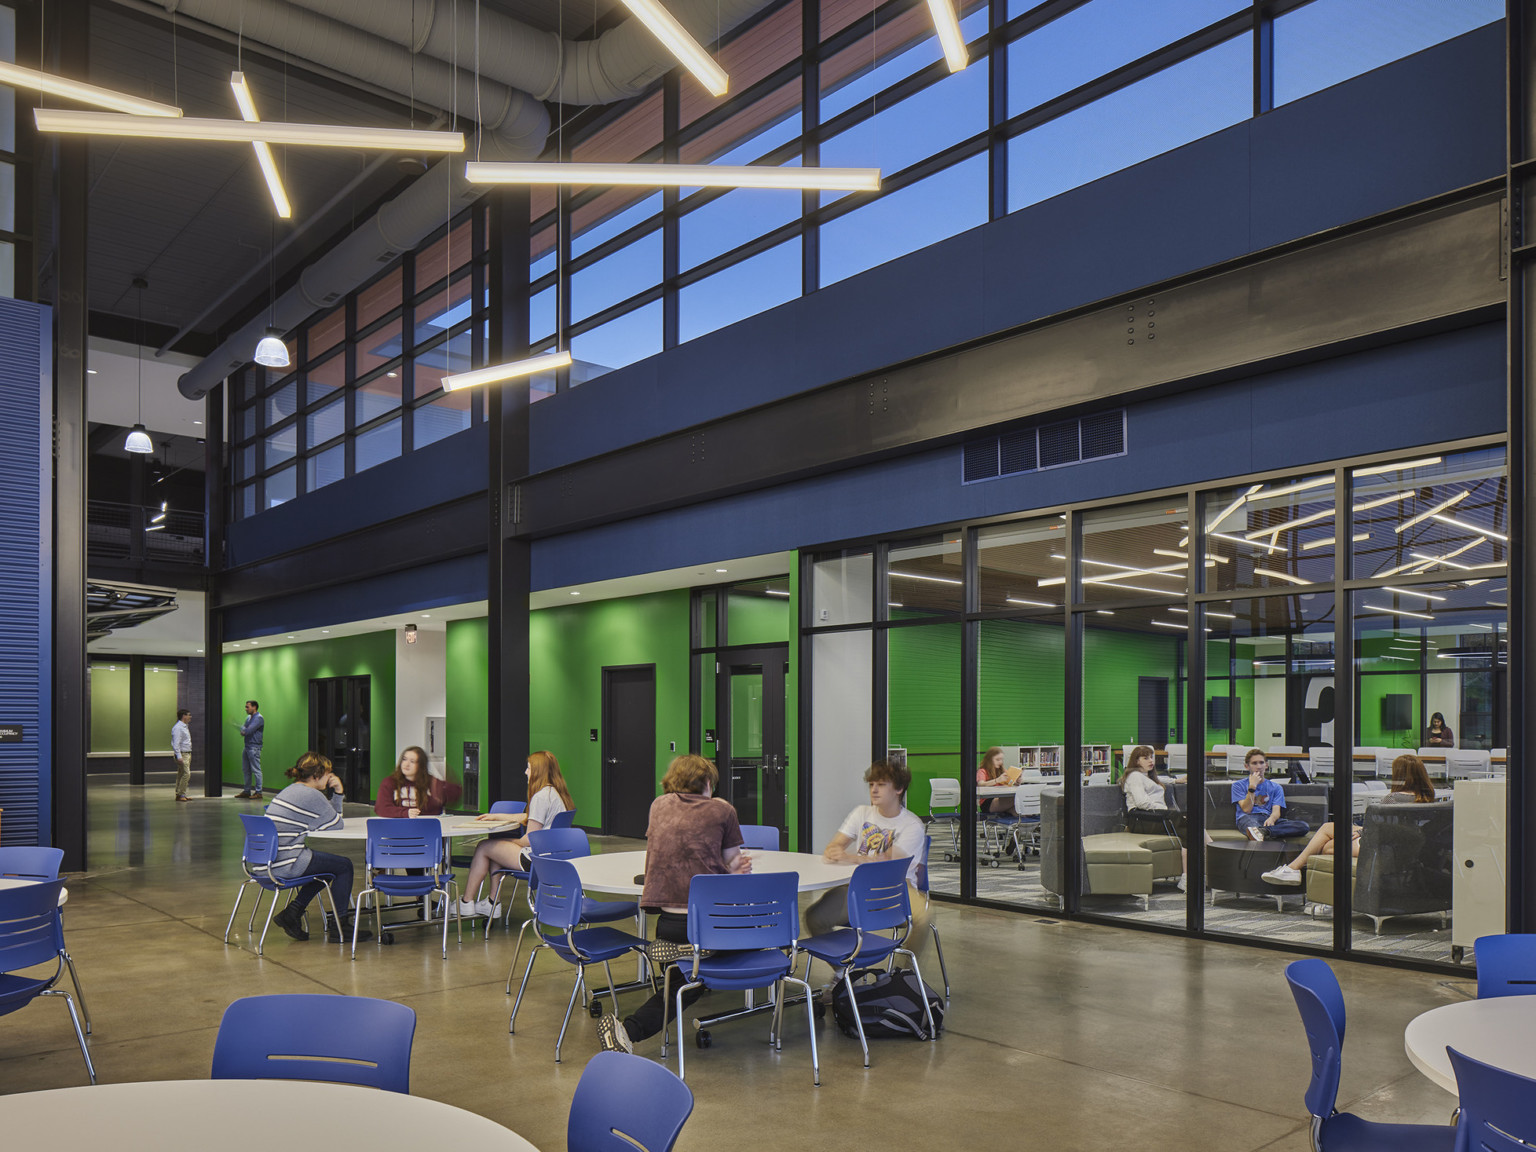 double height lunchroom with upper level windows bringing light into a space with blue furniture and bright green walls, library visible